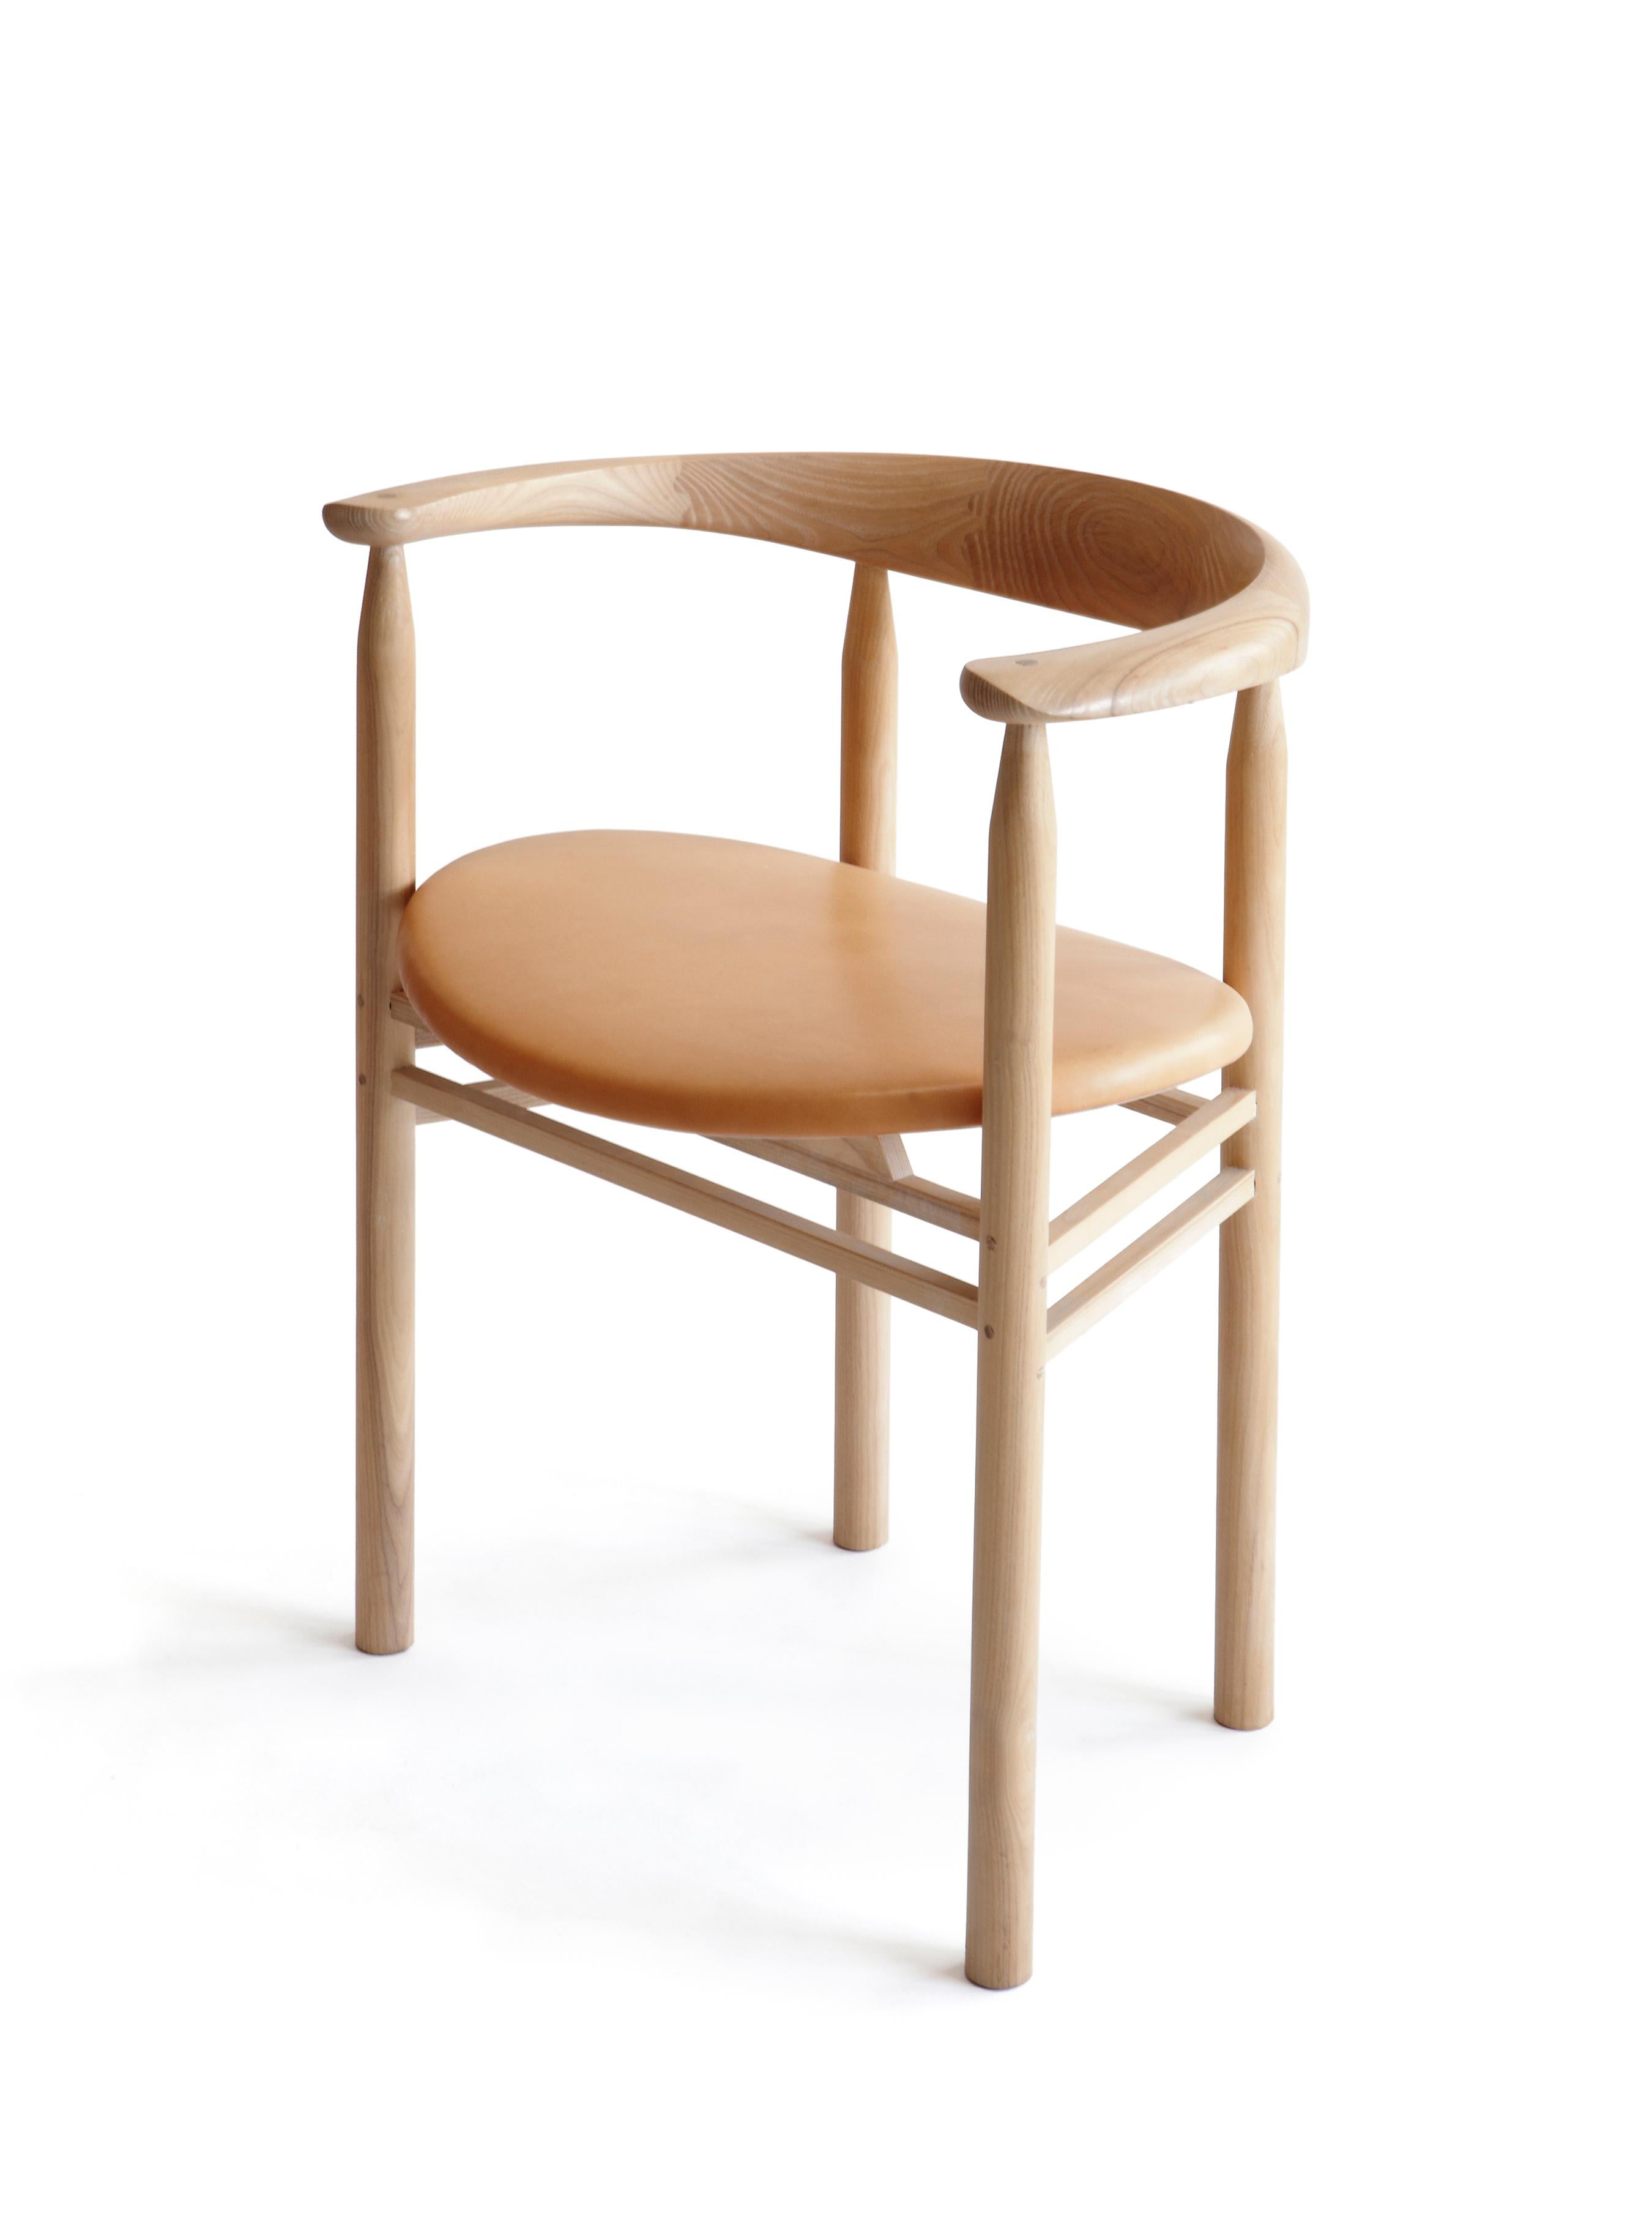 The Linea RMT6 chair is designed by Rudi Merz in 2011. Its horseshoe shaped backrest is manufactured using traditional joinery and the wide, upholstered seat gives good seating comfort.
The seat is always upholstered, and frame northern European